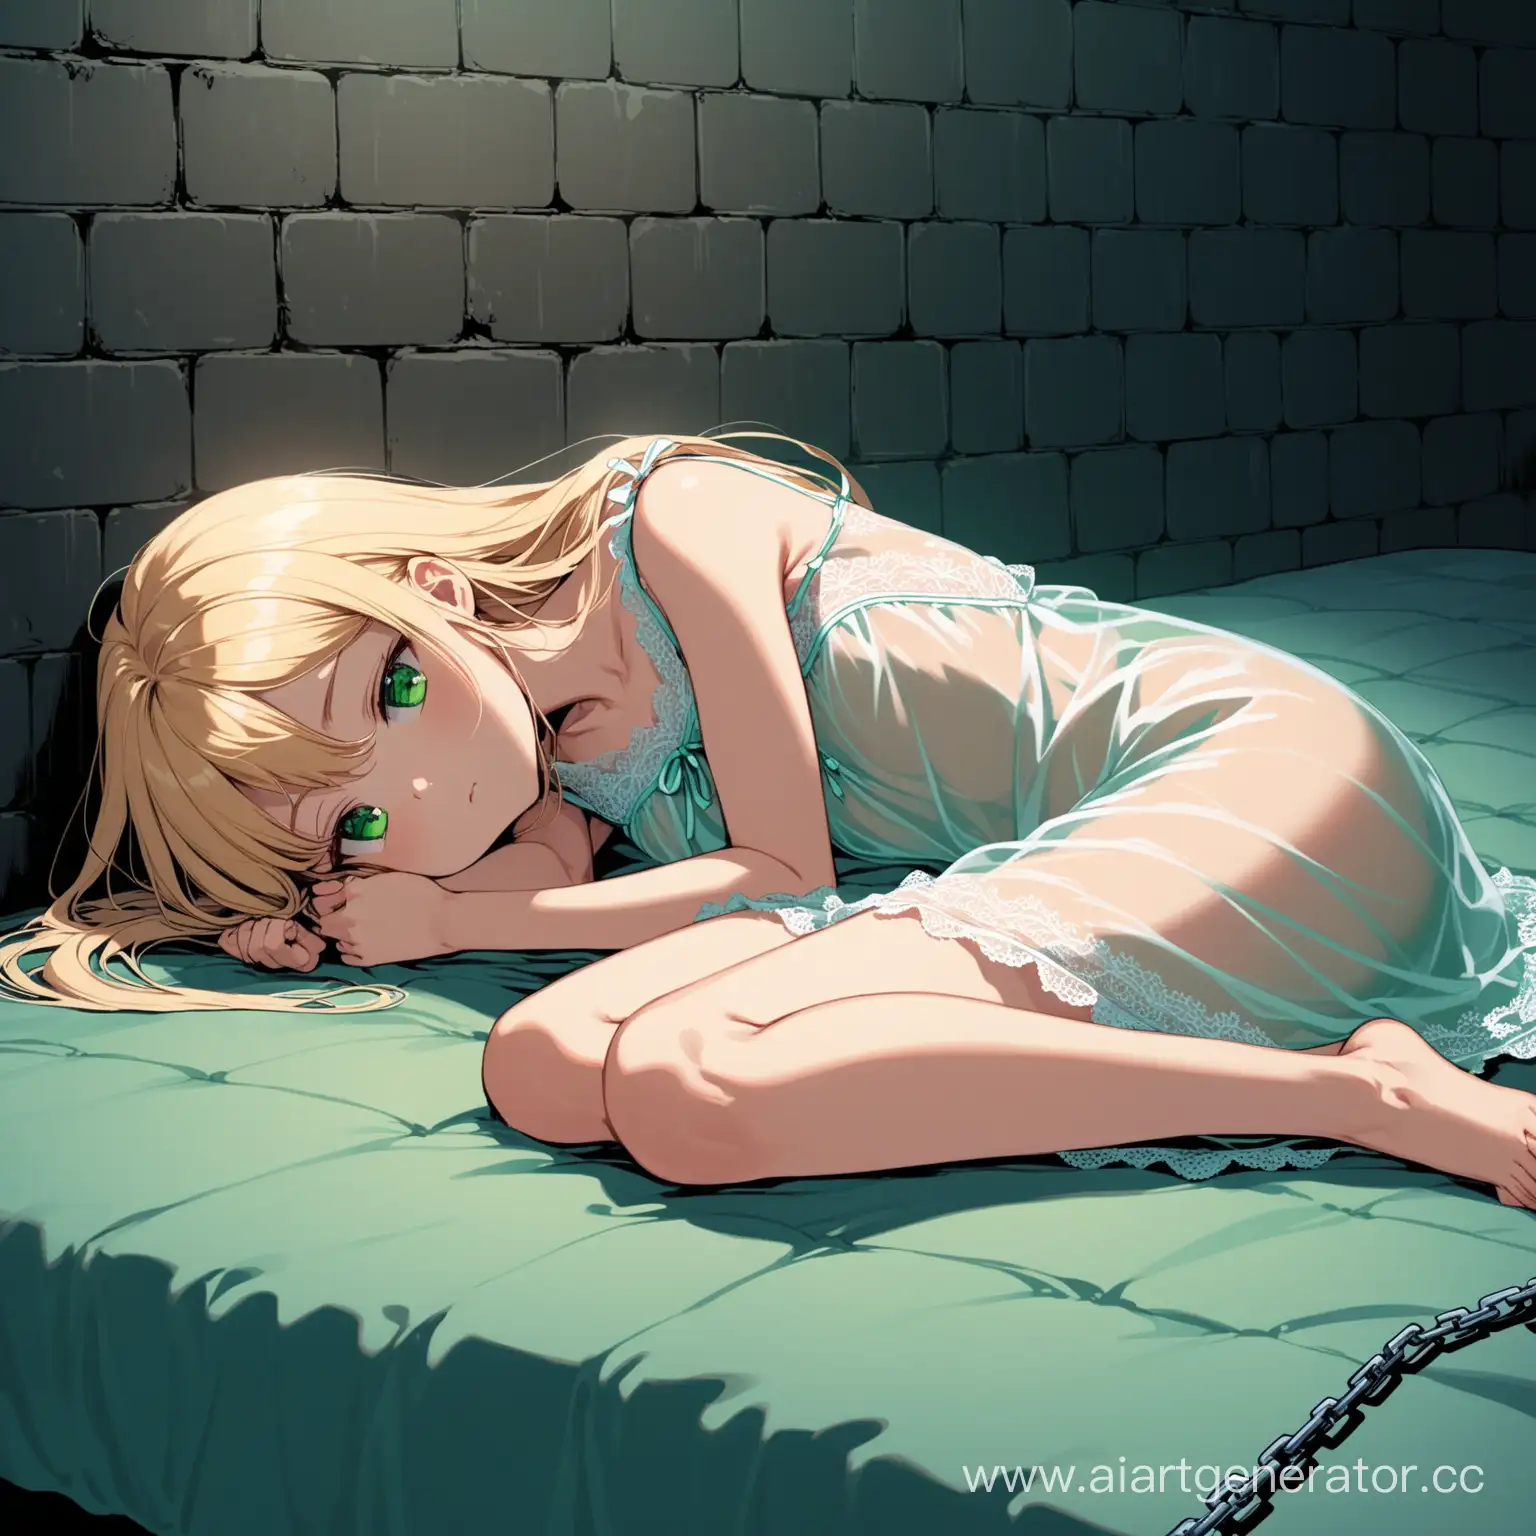 a short thin girl, blonde with long hair, green eyes, she is wearing a semi-transparent short nightgown, she is lying on a mattress in the basement, and her leg is attached by a chain to the wall, she looks sad and detached